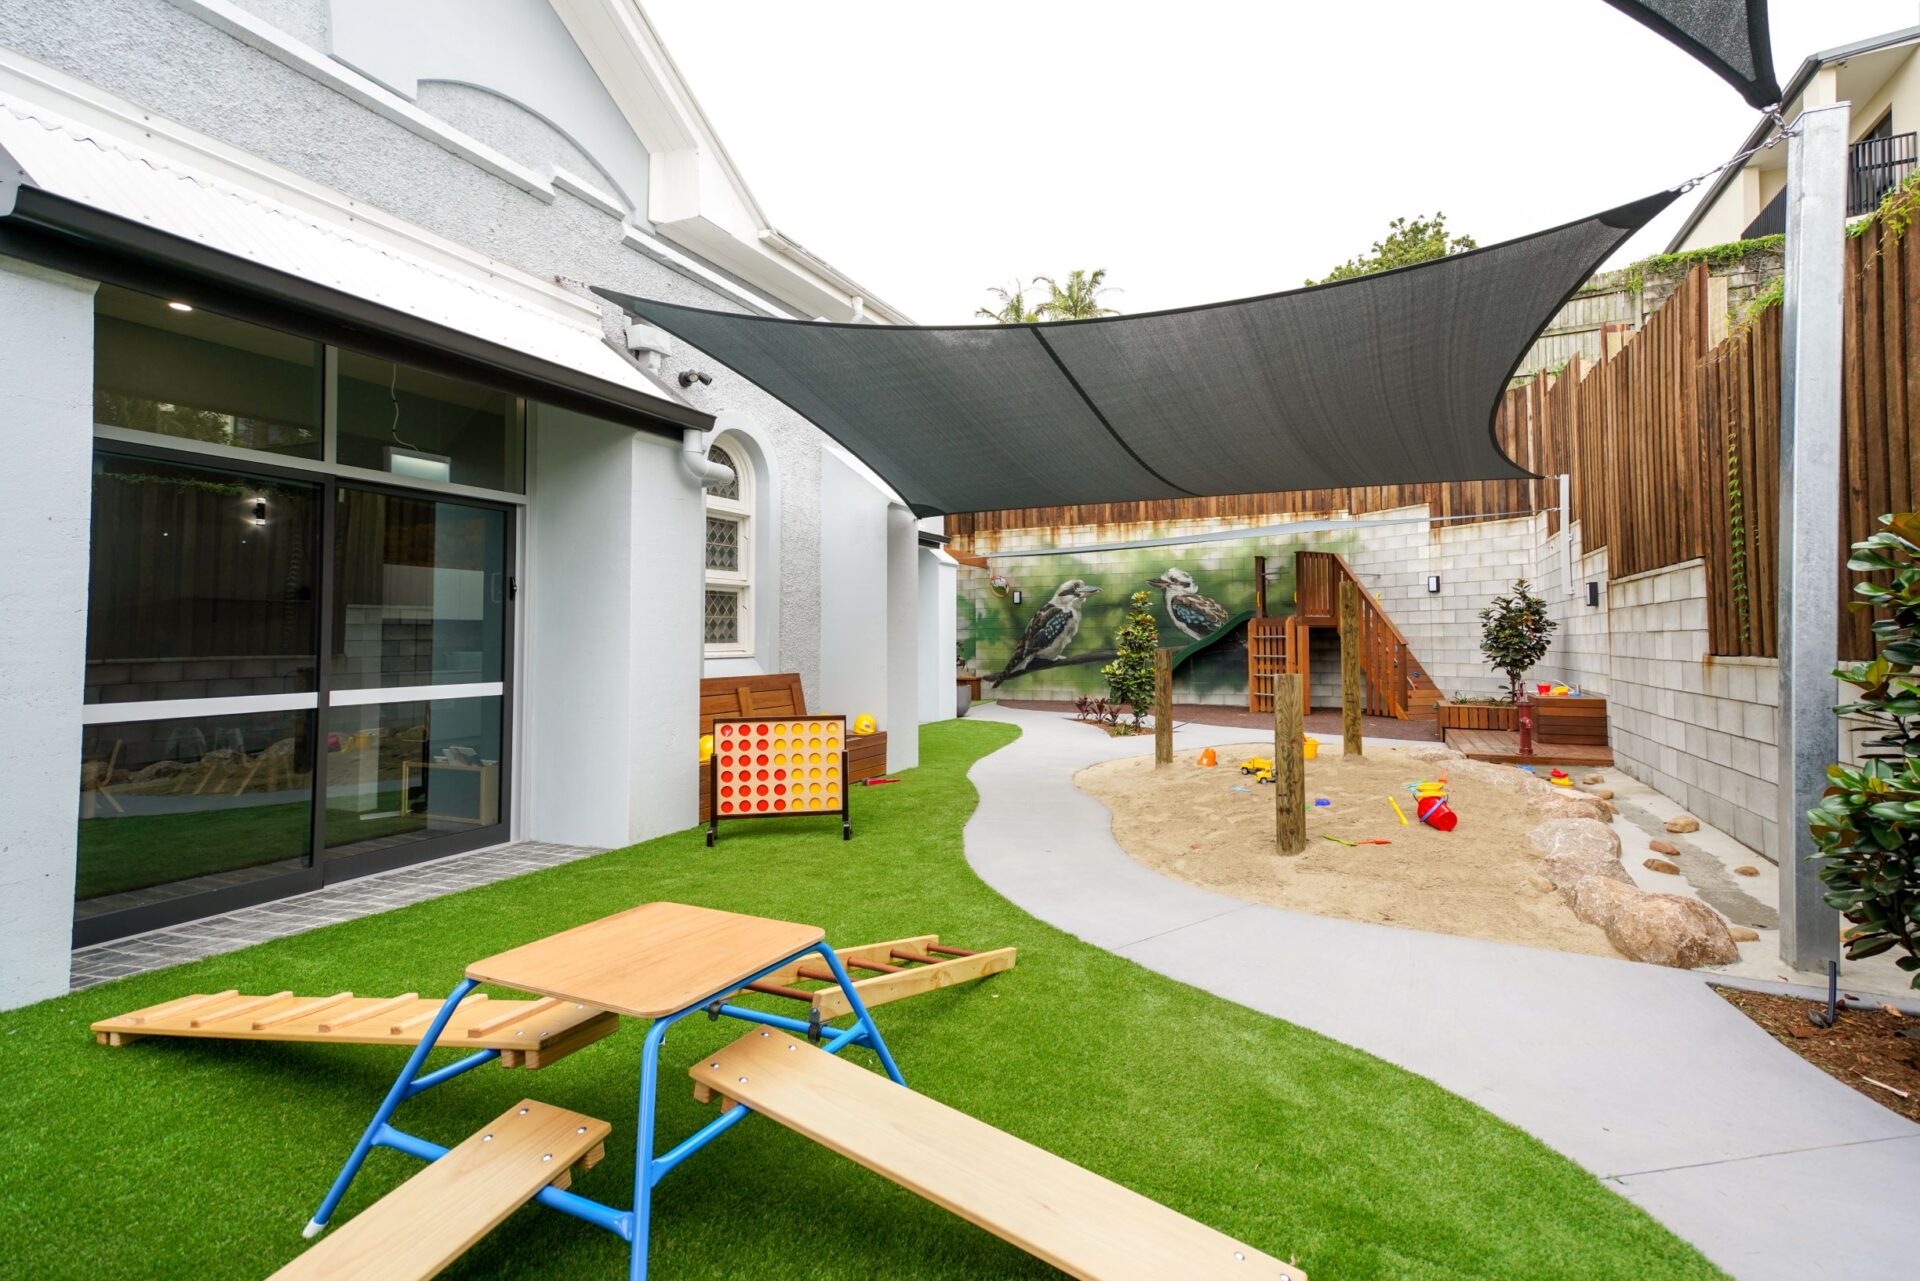 Grassy Outdoor Play Area With Playground And Sandpit at Little Locals Auchenflower Early Learning Centre in Brisbane.